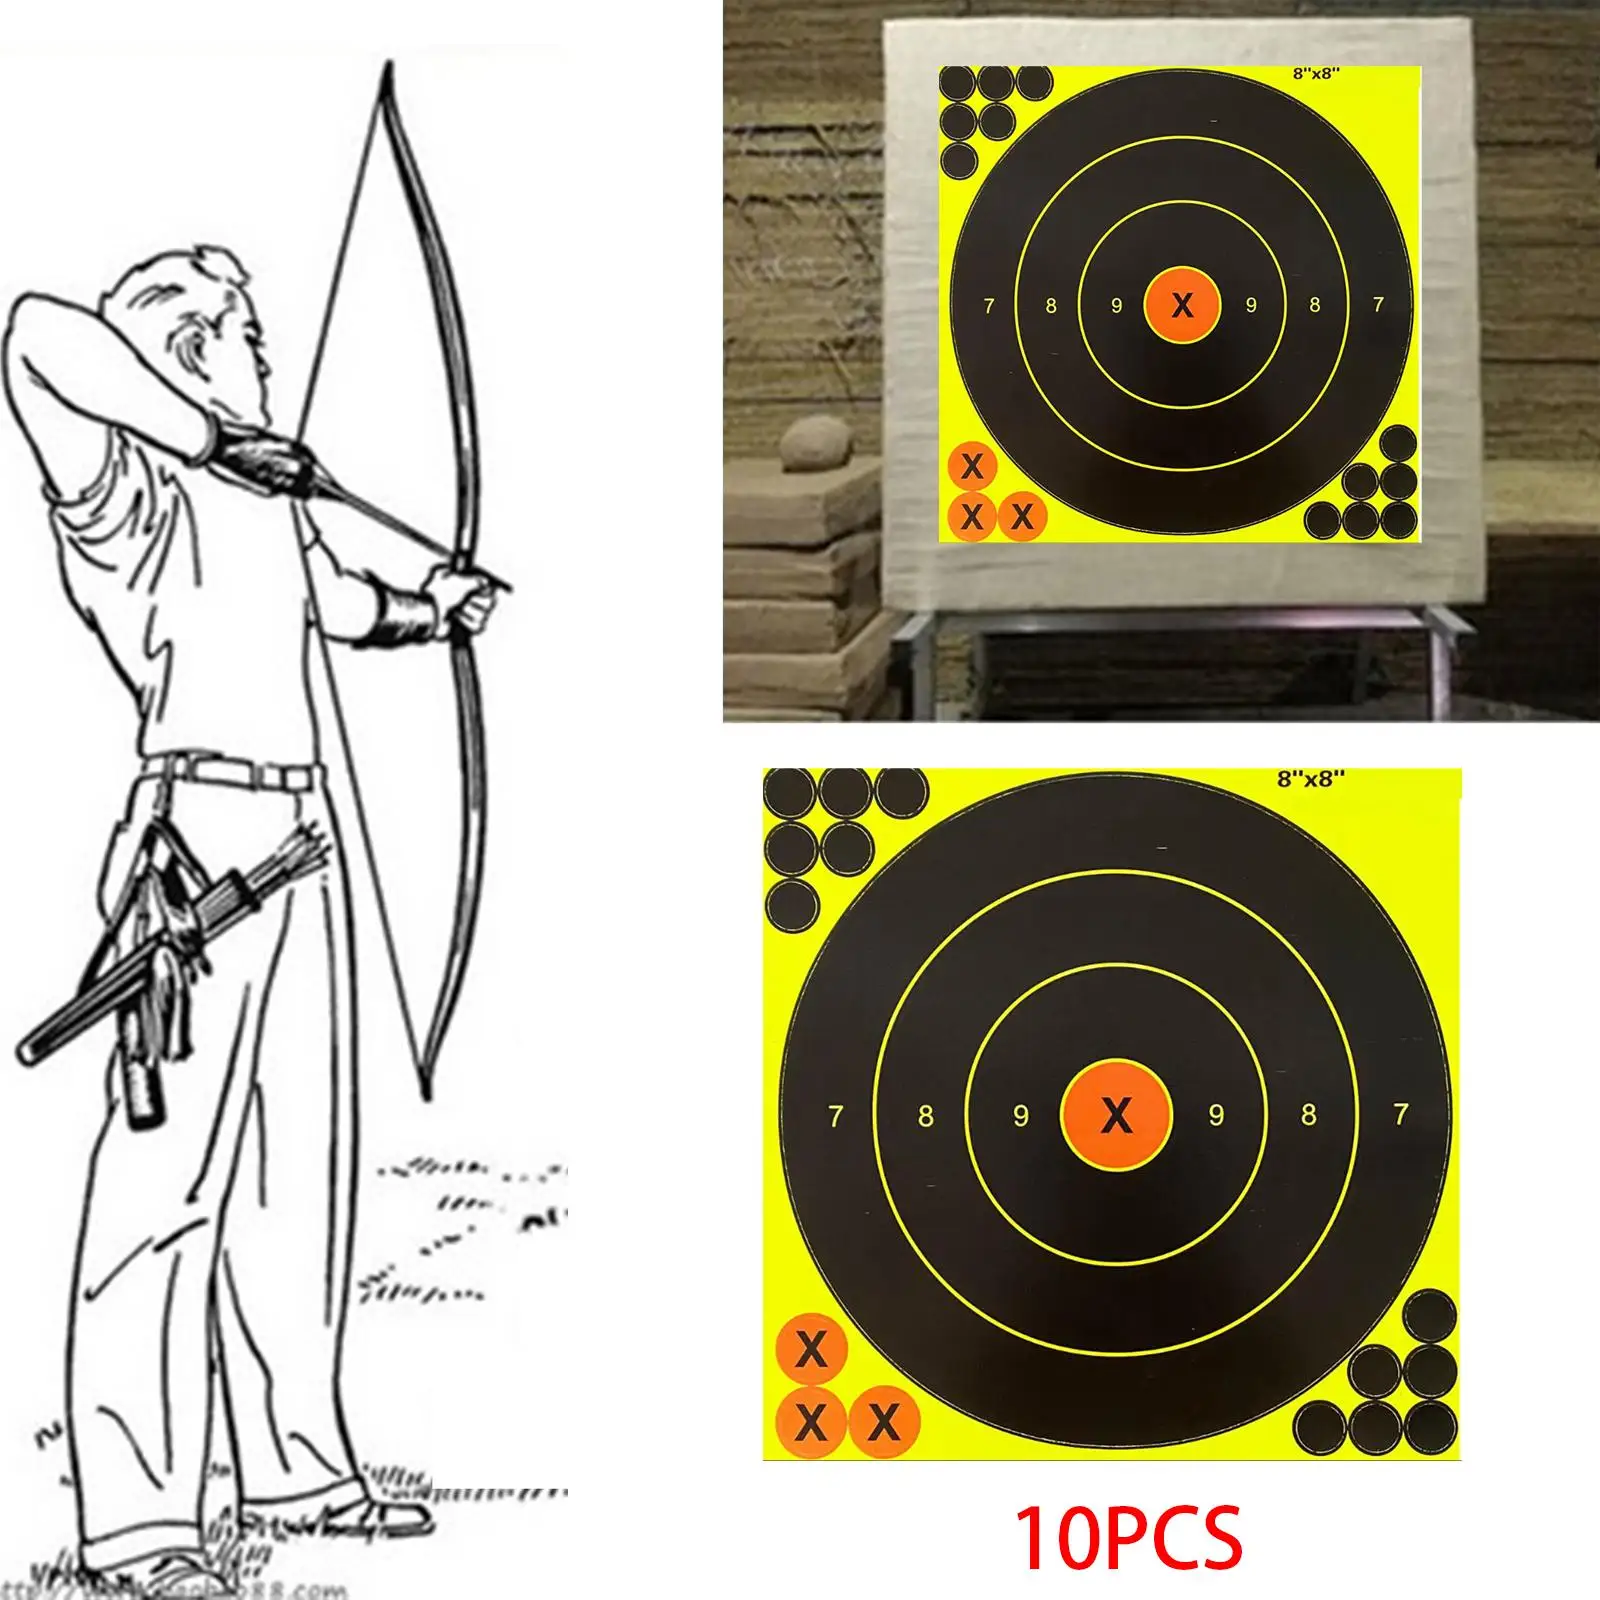 10 Pieces 8 inch Shooting Target Paper Targets Stickers Self Adhesive Replacement Reactive for Shooting Practice Outdoor